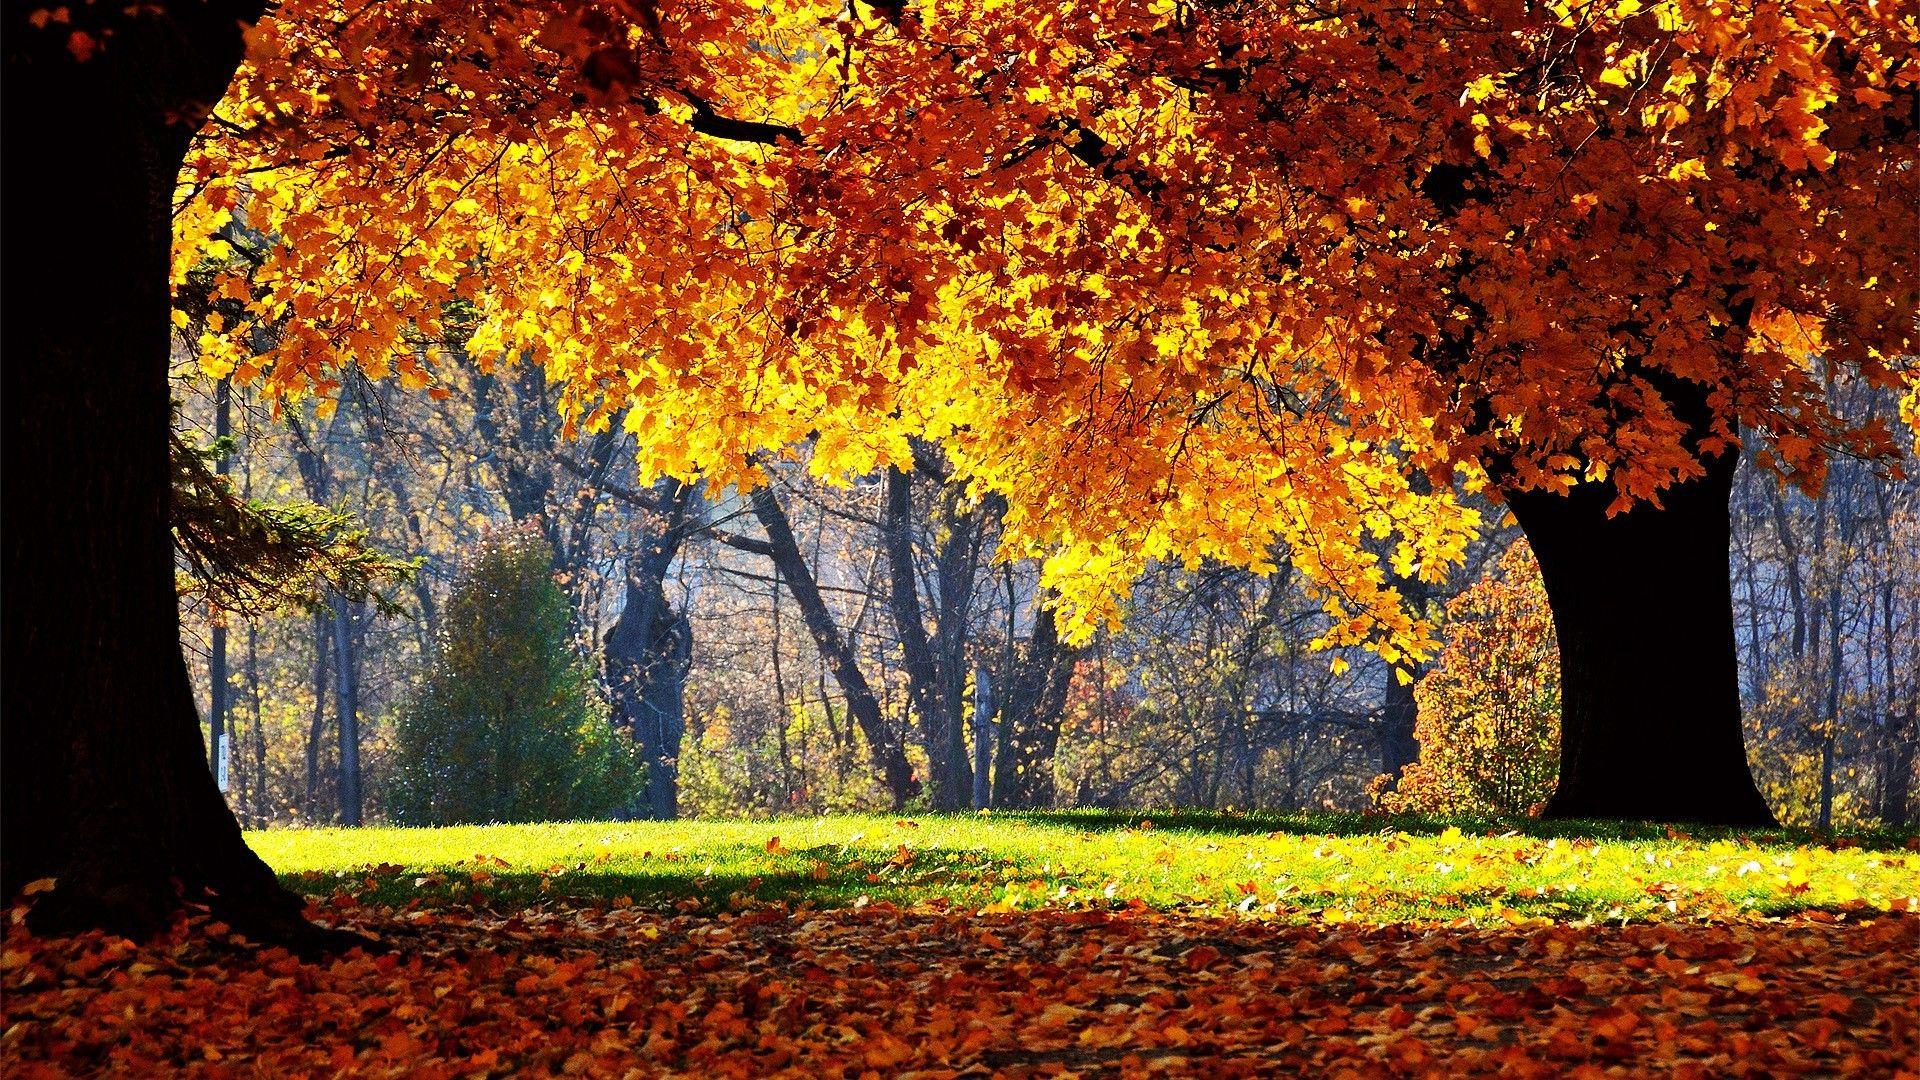 Relaxing Autumn Day Wallpapers Top Free Relaxing Autumn Day Backgrounds Wallpaperaccess 4004